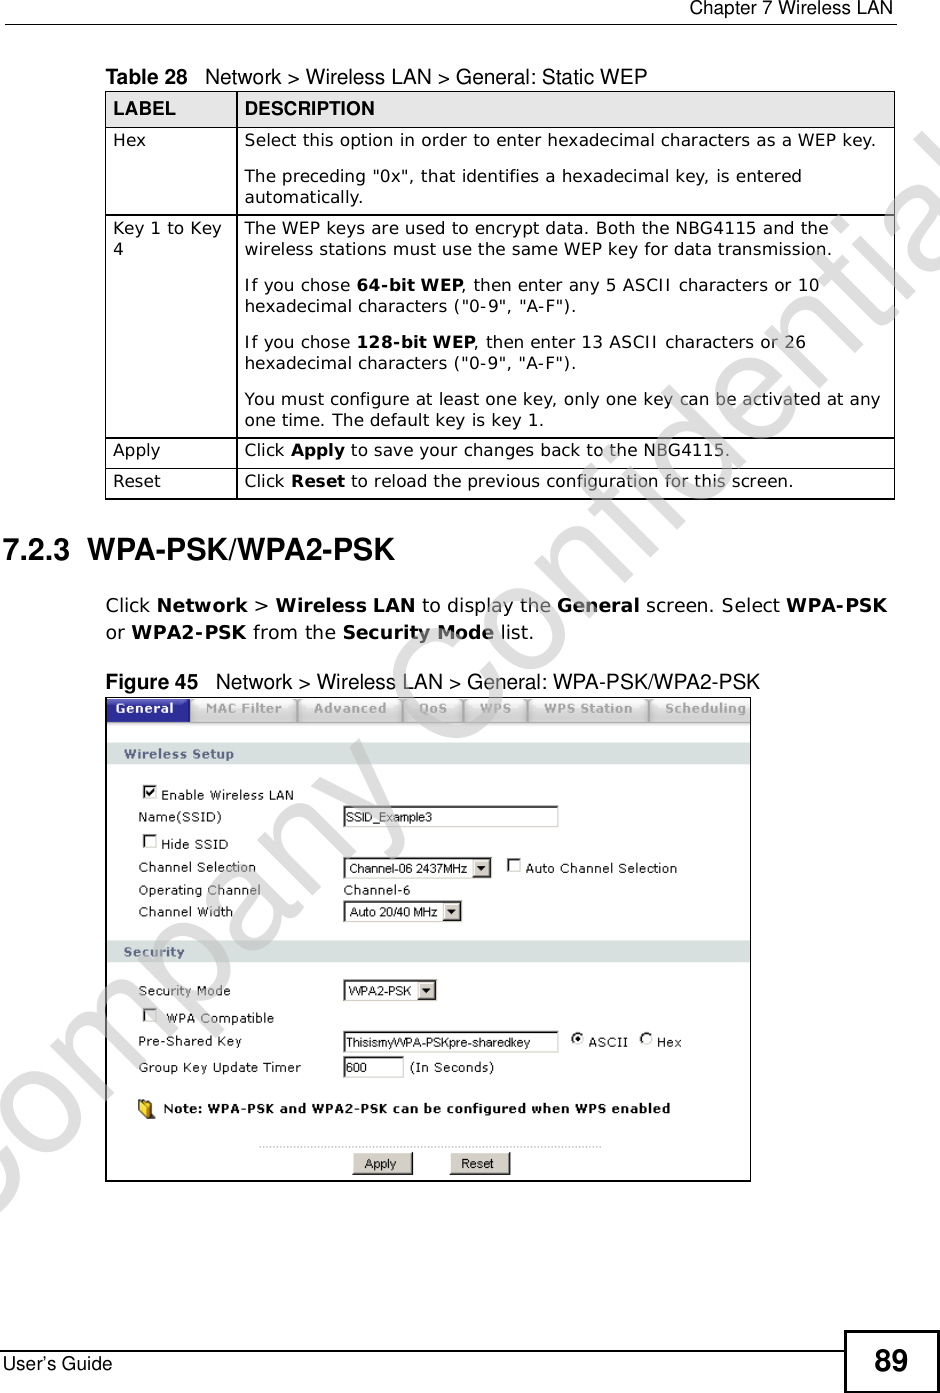  Chapter 7Wireless LANUser’s Guide 897.2.3  WPA-PSK/WPA2-PSKClick Network &gt; Wireless LAN to display the General screen. Select WPA-PSKor WPA2-PSK from the Security Mode list.Figure 45   Network &gt; Wireless LAN &gt; General: WPA-PSK/WPA2-PSKHex Select this option in order to enter hexadecimal characters as a WEP key. The preceding &quot;0x&quot;, that identifies a hexadecimal key, is entered automatically.Key 1 to Key 4The WEP keys are used to encrypt data. Both the NBG4115 and the wireless stations must use the same WEP key for data transmission.If you chose 64-bit WEP, then enter any 5 ASCII characters or 10 hexadecimal characters (&quot;0-9&quot;, &quot;A-F&quot;).If you chose 128-bit WEP, then enter 13 ASCII characters or 26 hexadecimal characters (&quot;0-9&quot;, &quot;A-F&quot;). You must configure at least one key, only one key can be activated at any one time. The default key is key 1.Apply Click Apply to save your changes back to the NBG4115.Reset Click Reset to reload the previous configuration for this screen.Table 28   Network &gt; Wireless LAN &gt; General: Static WEPLABEL DESCRIPTIONCompany Confidential